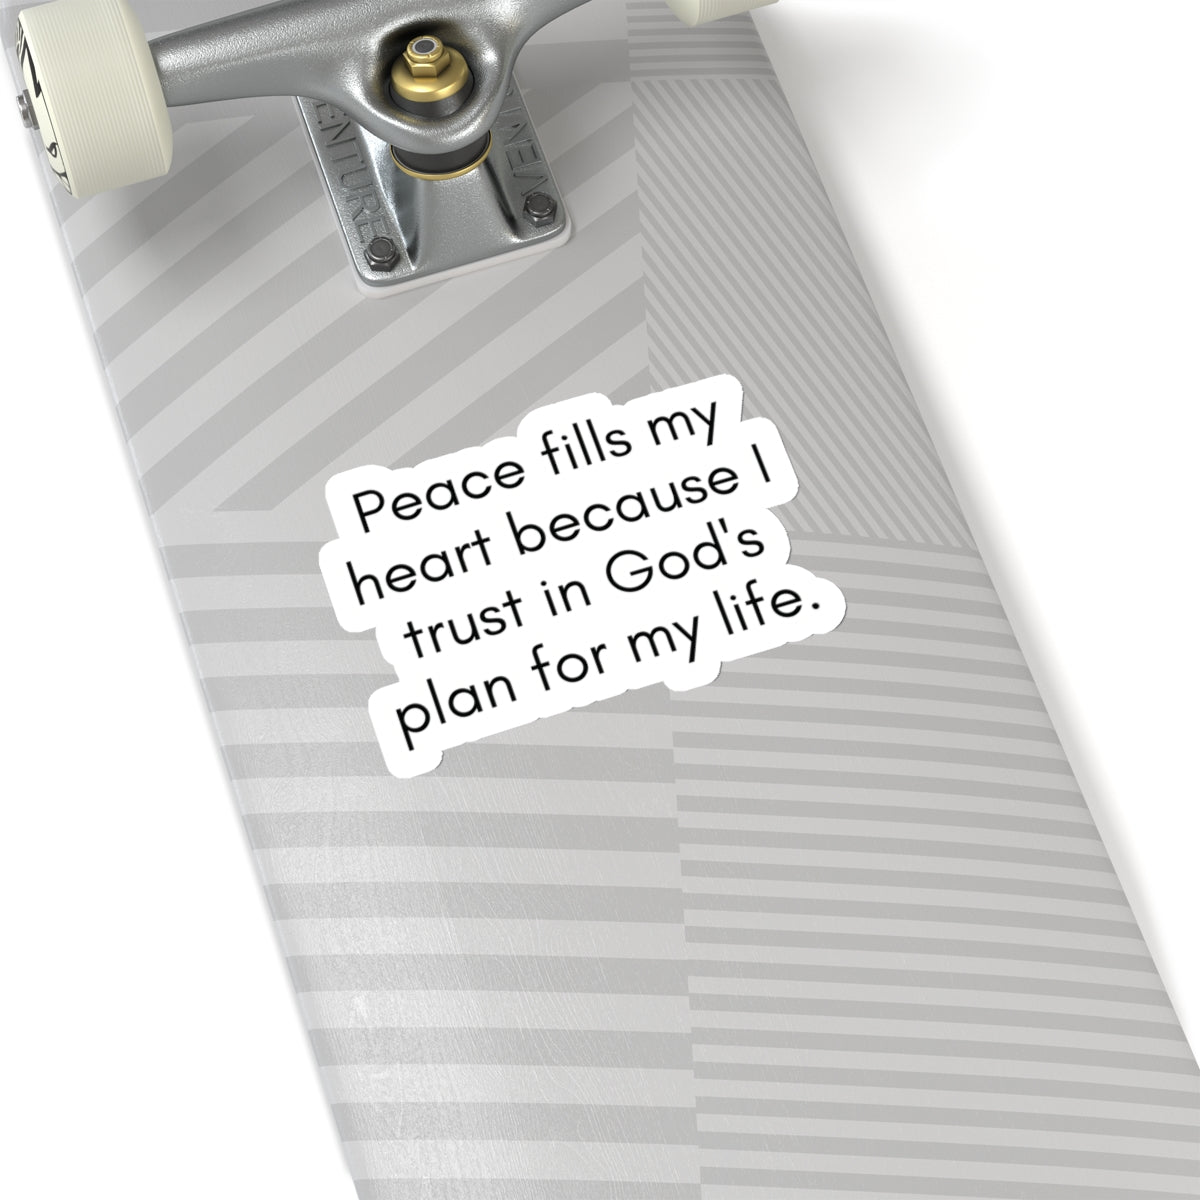 Trust In God's Plan For My Life Inspirational Quote Kiss-Cut Stickers-KISS CUT stickers-mysticalcherry